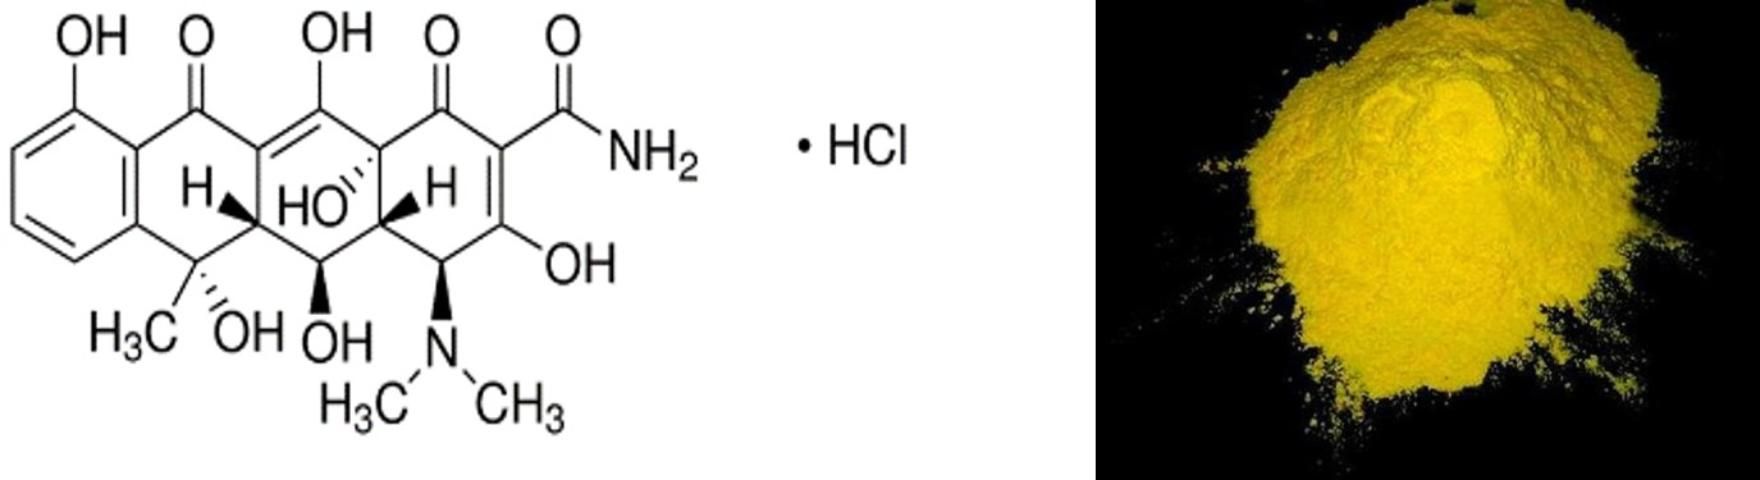 Figure 2. Chemical structure of oxytetracycline-hydrochloride (left) and physical appearance (right).